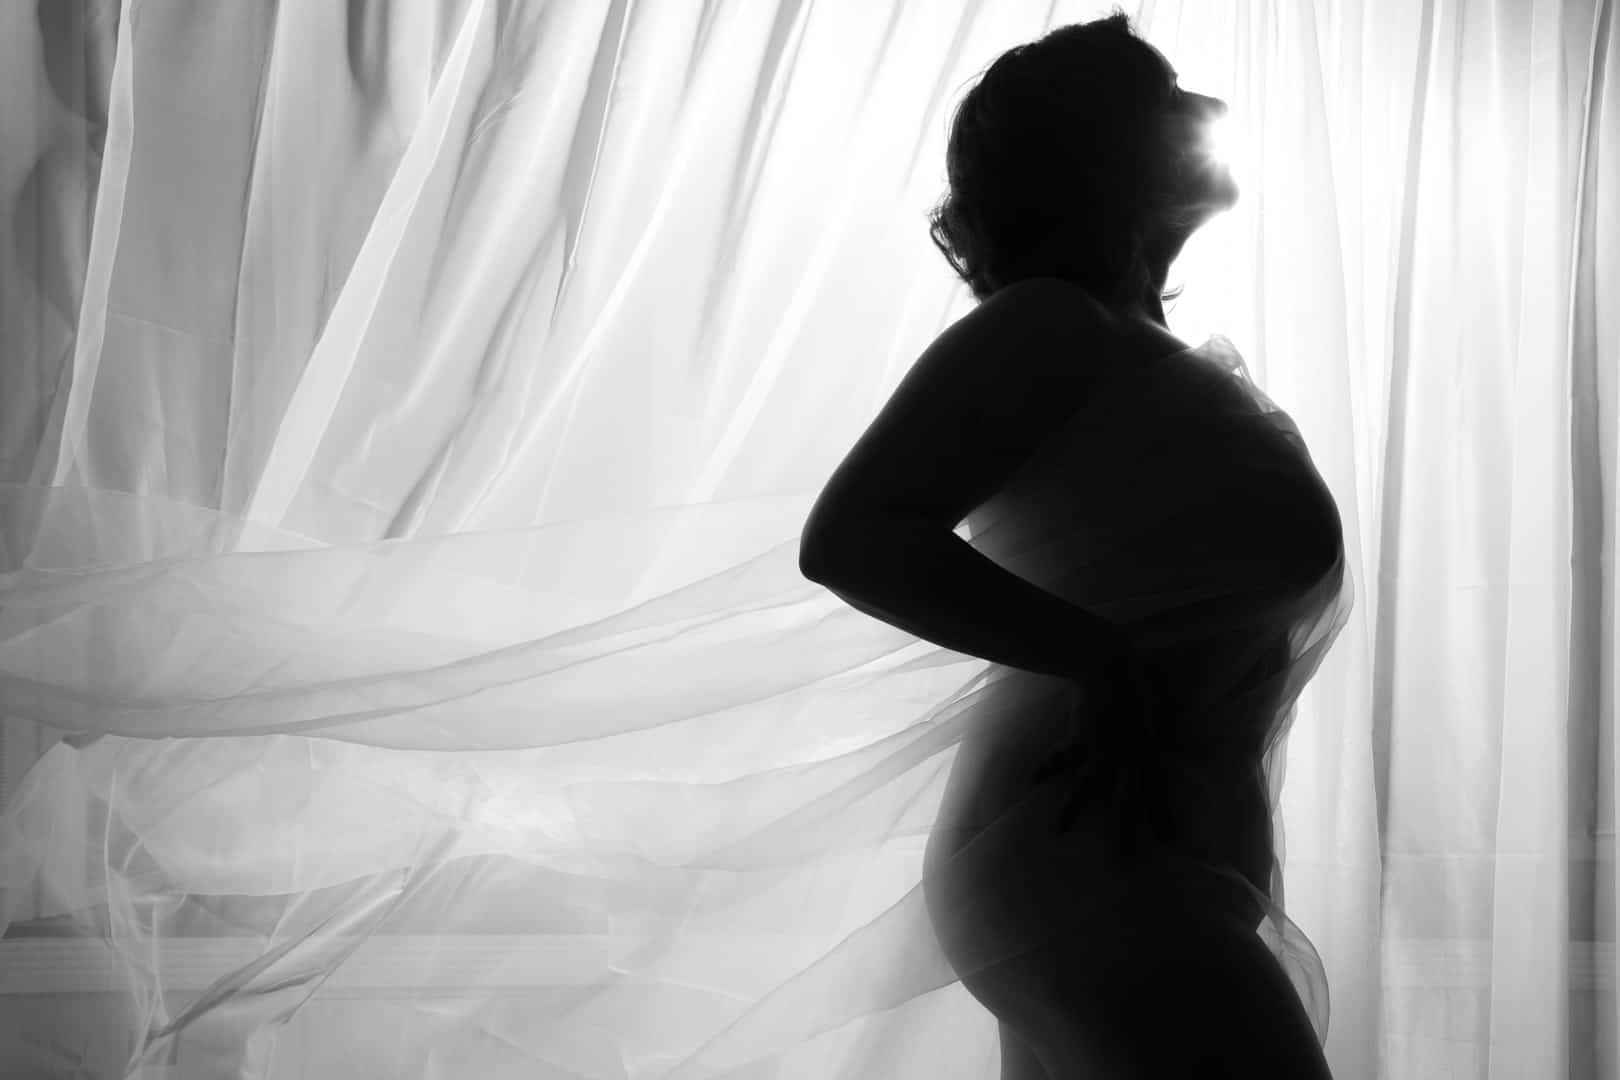  boudoir image of woman in silhouette against sheer curtains